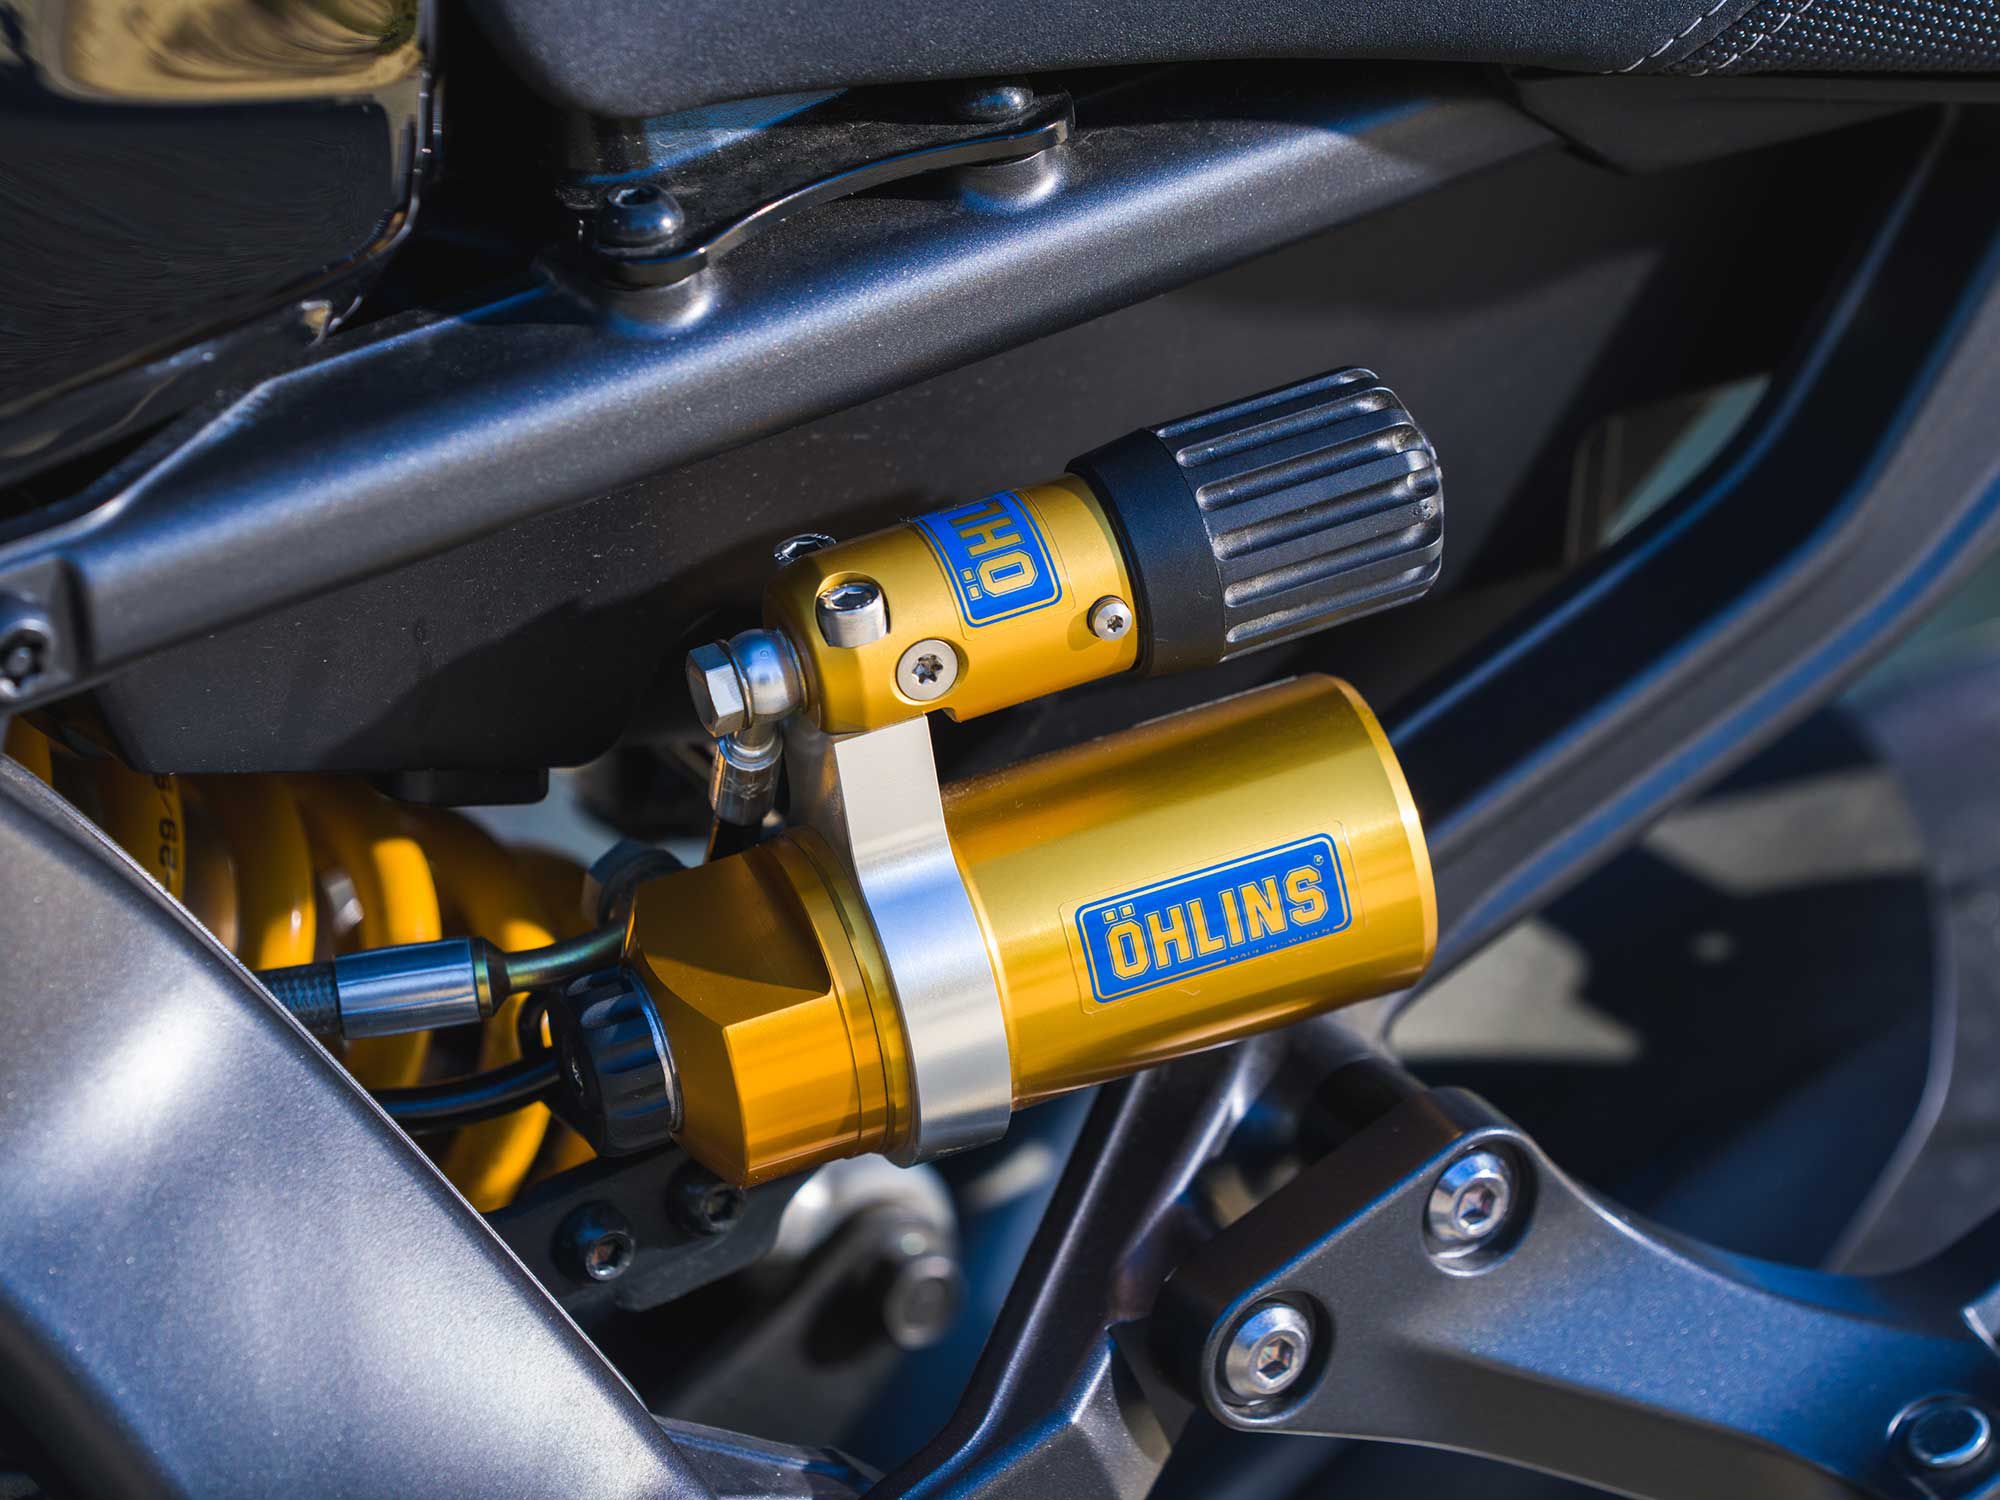 A hydraulic preload adjuster allows the rider to tweak rear ride height based on handling preference or vehicle load.